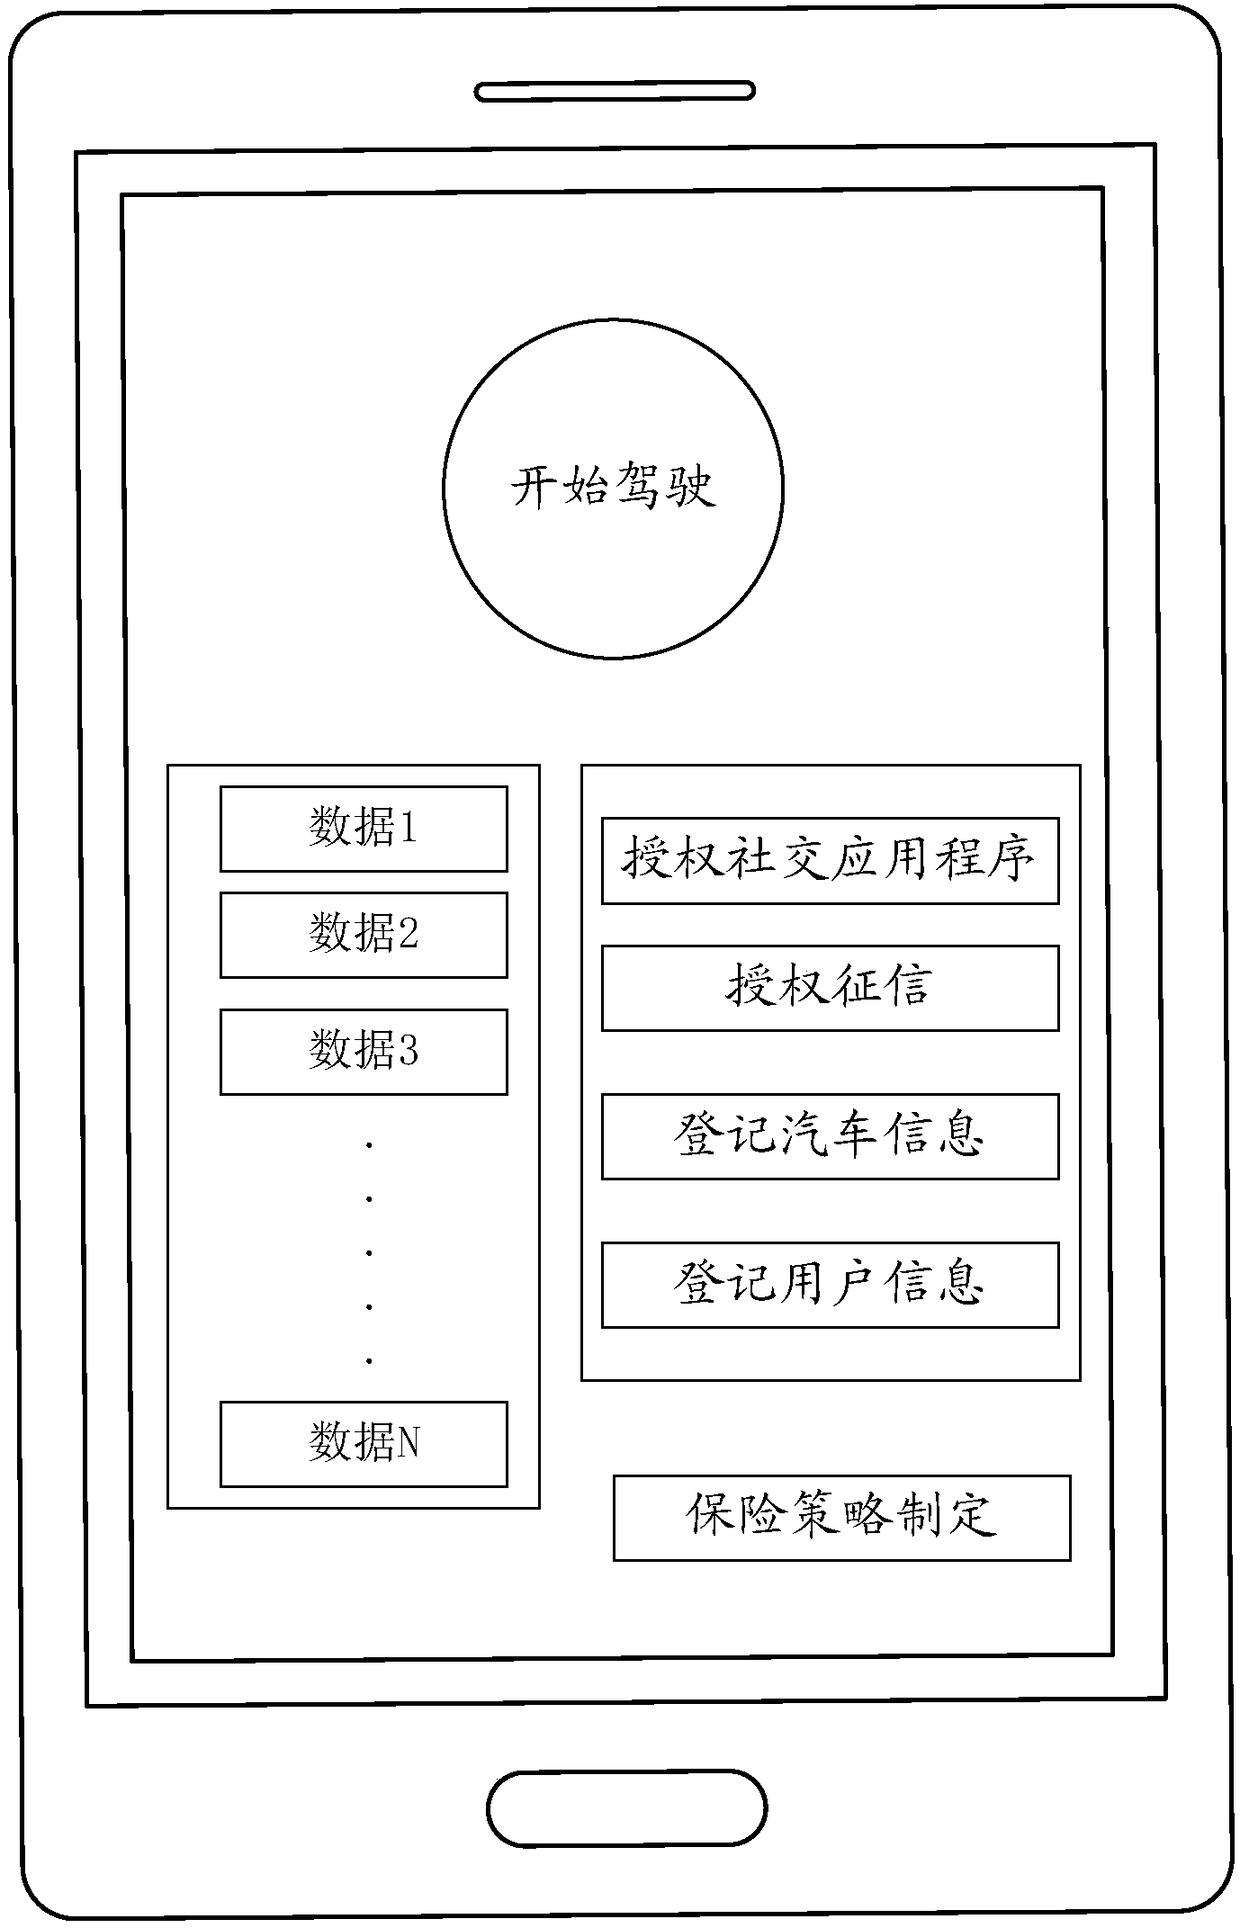 Automobile insurance information processing method and device, server and readable storage medium